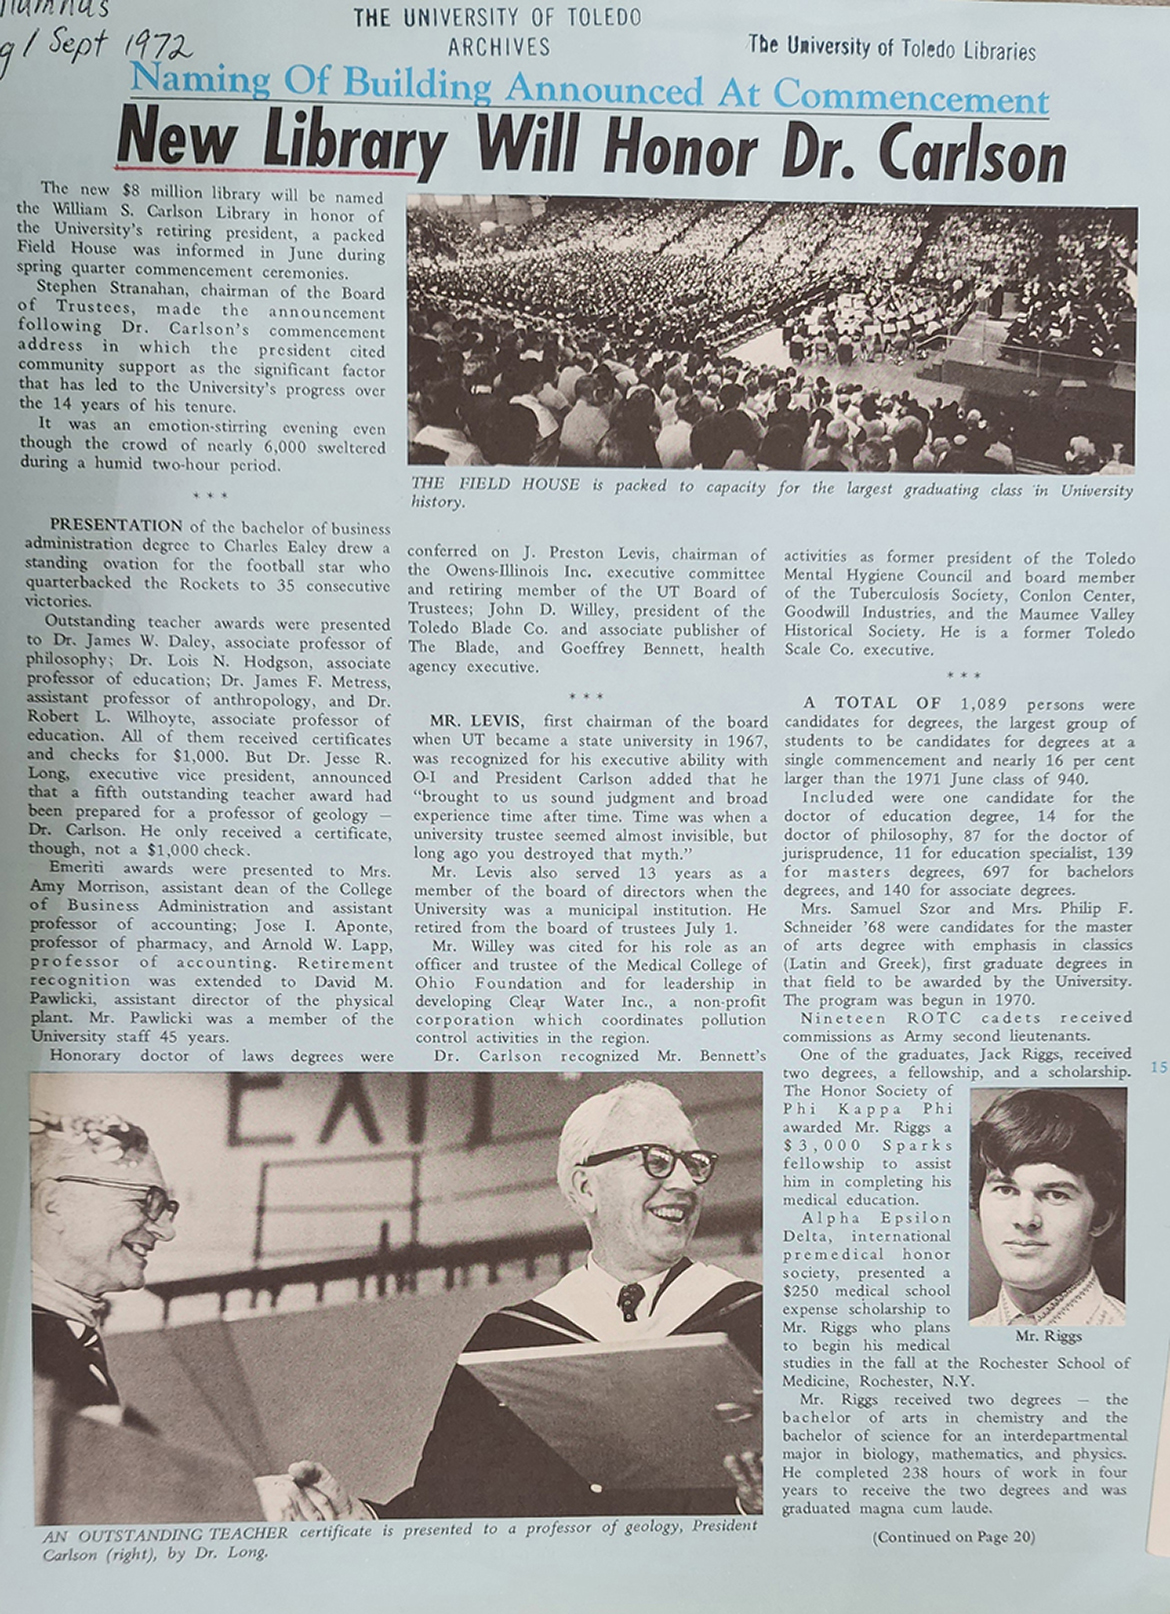 New Library Will Honor Dr. Carlson, September 1, 1972